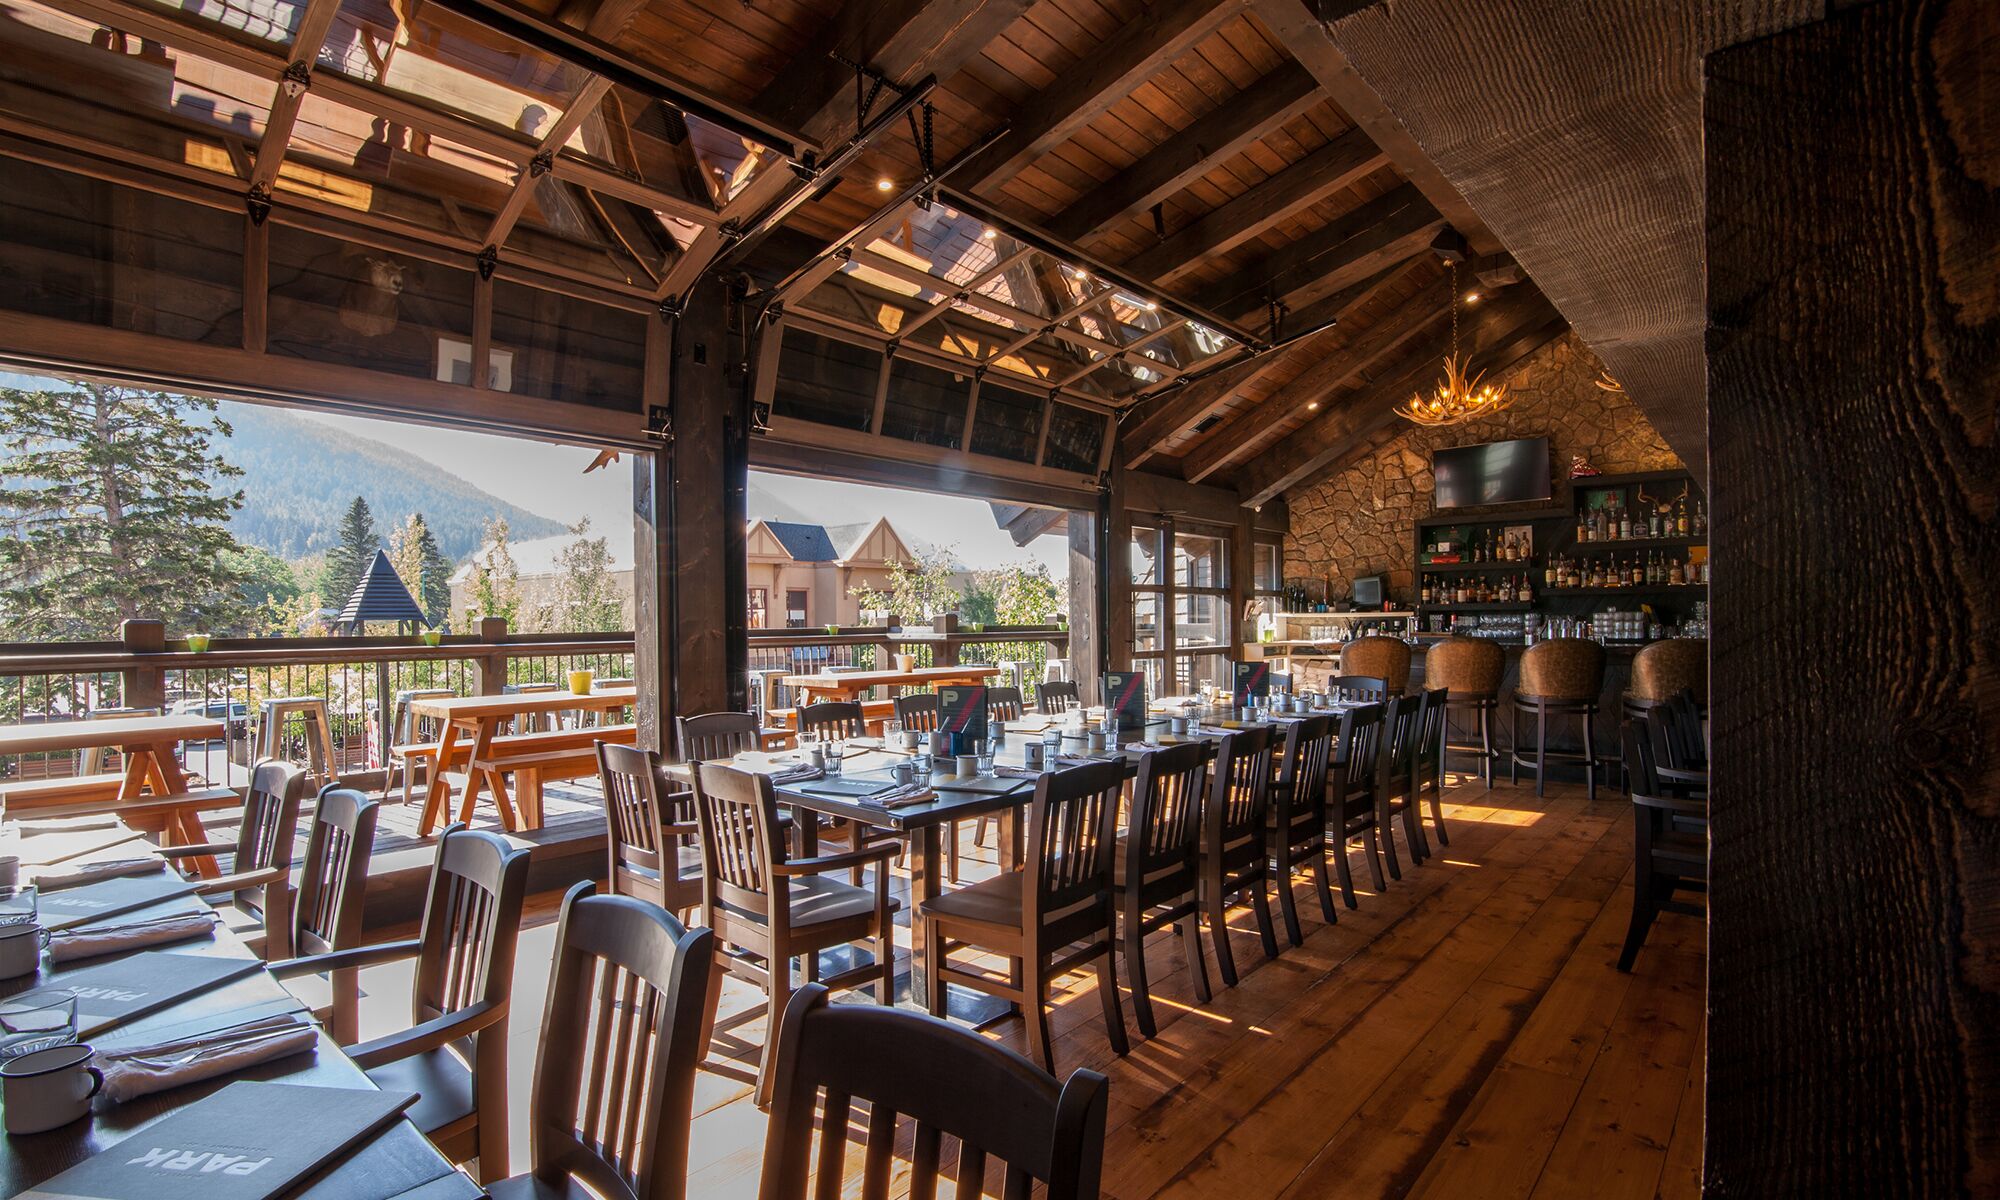 The dining patio at the Park Distillery in Banff National Park.